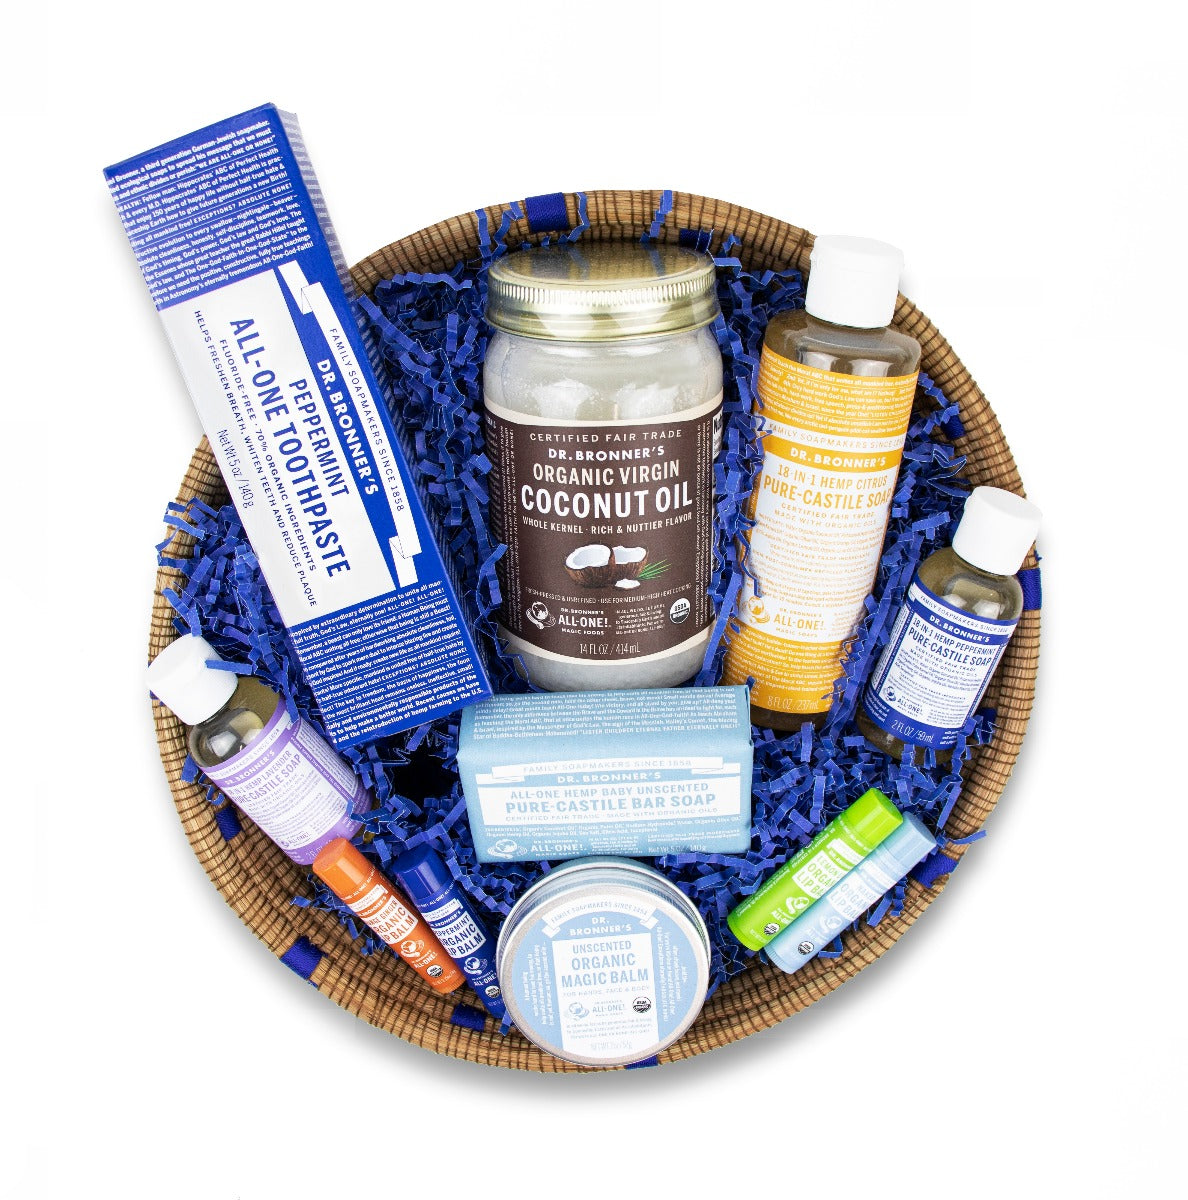 Dr. Bronner's Fair Trade Gift Basket - One Size